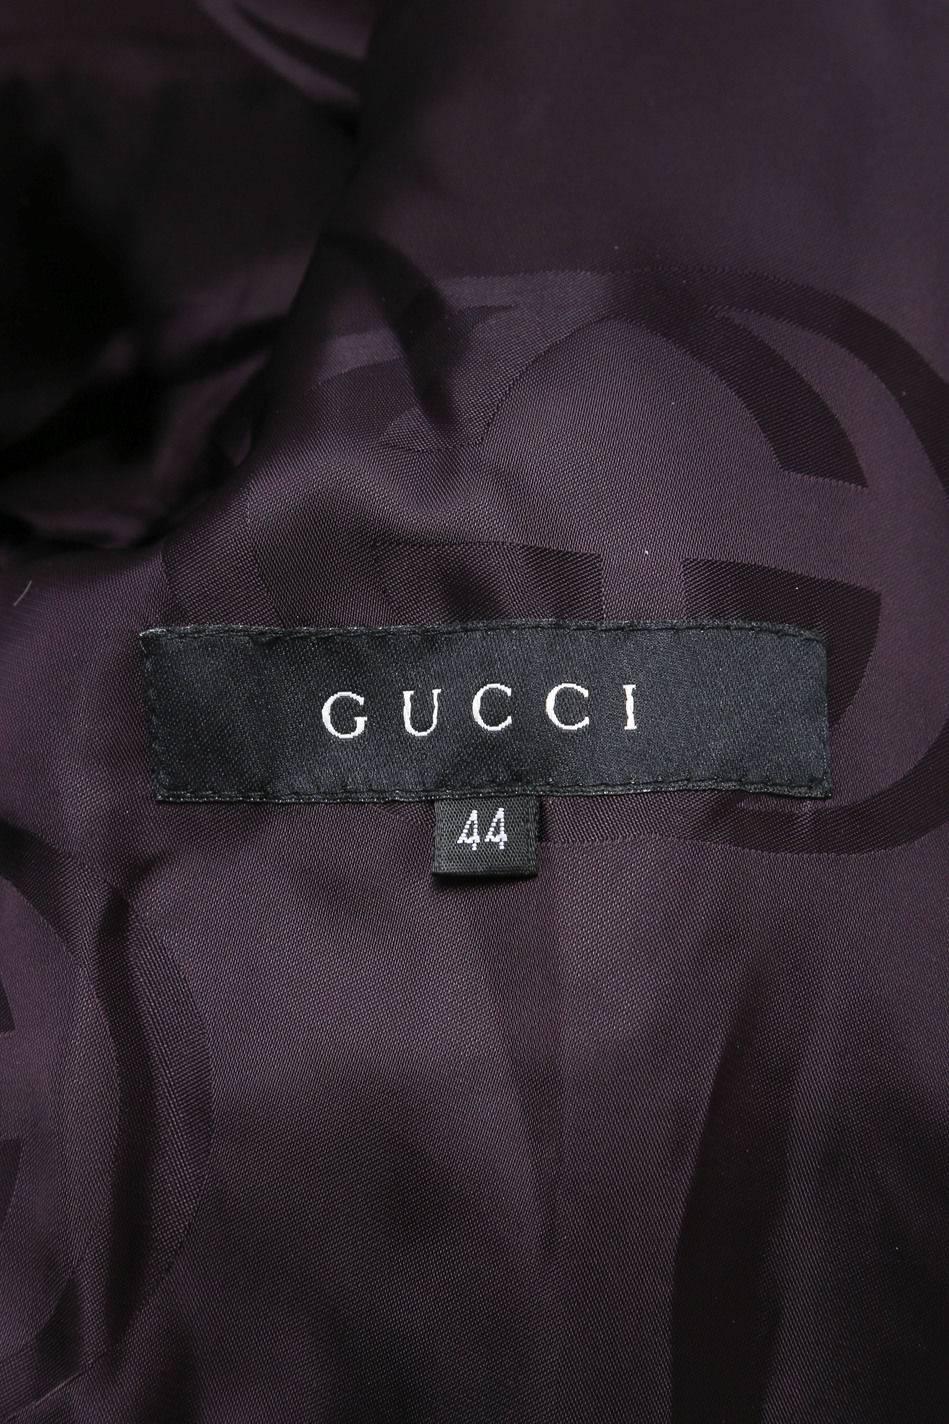 Gucci Dark Purple Woolen Bow Long Sleeve Pea Coat Size 44 In Good Condition For Sale In Chicago, IL